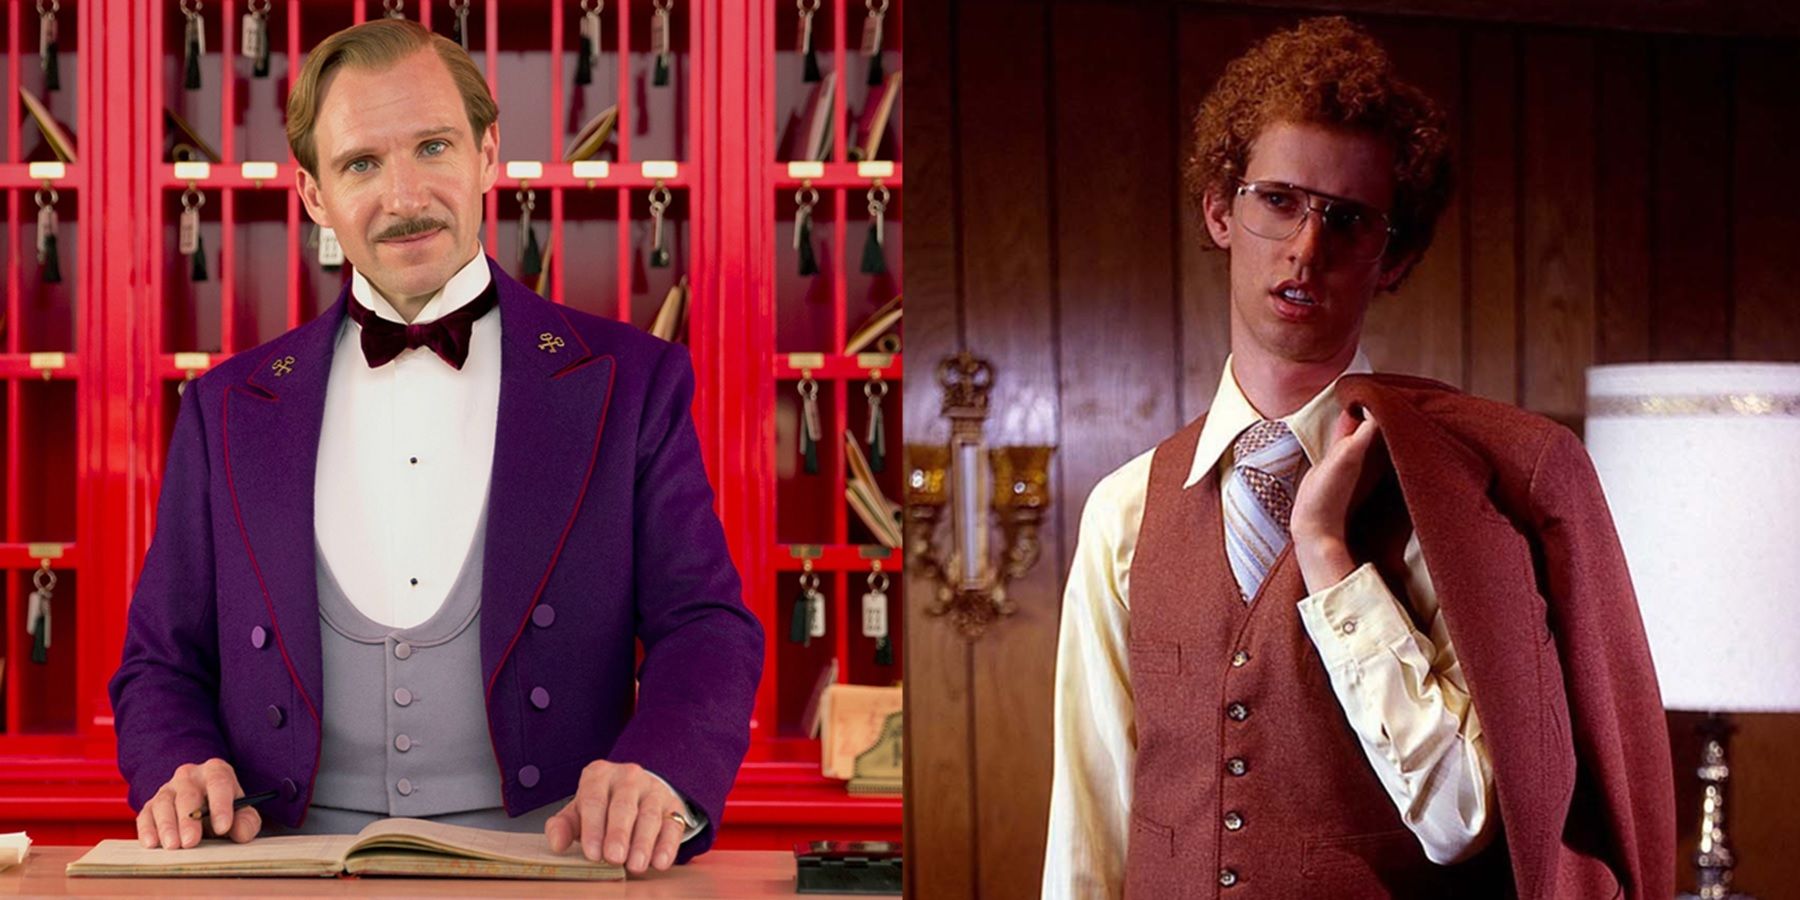 The Grand Budapest Hotel & 9 Other Comedies About Oddballs